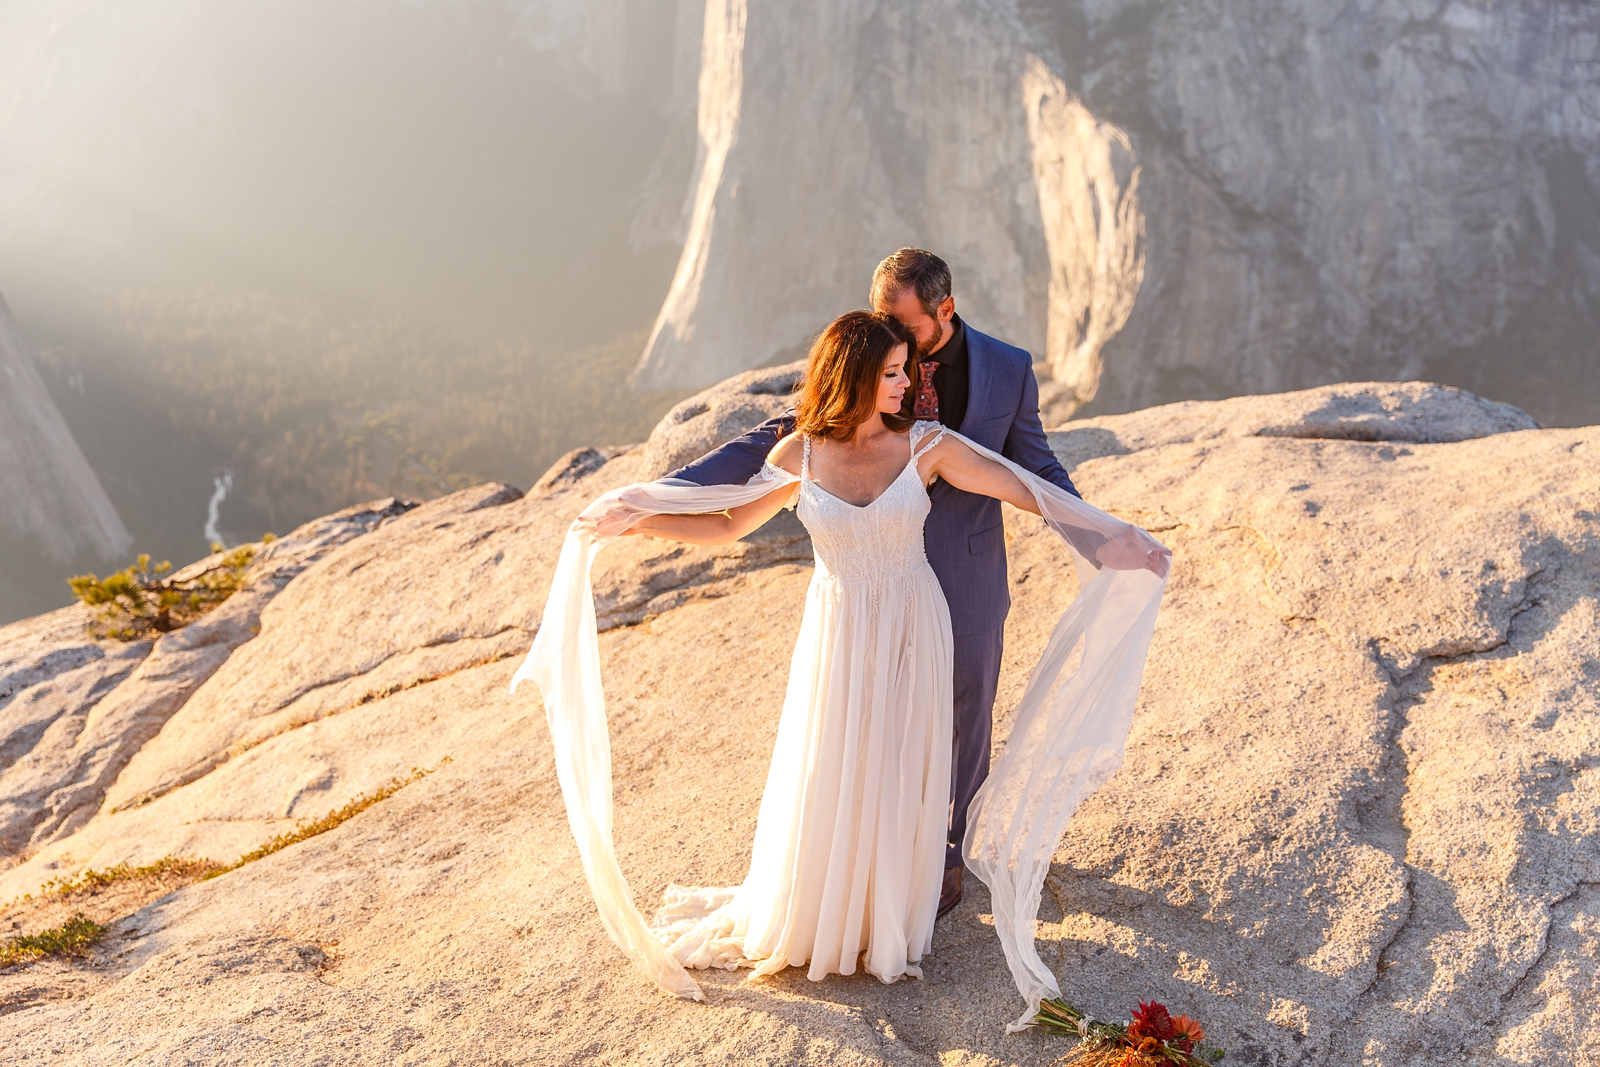 This couple felt free eloping in Yosemite at golden hour.